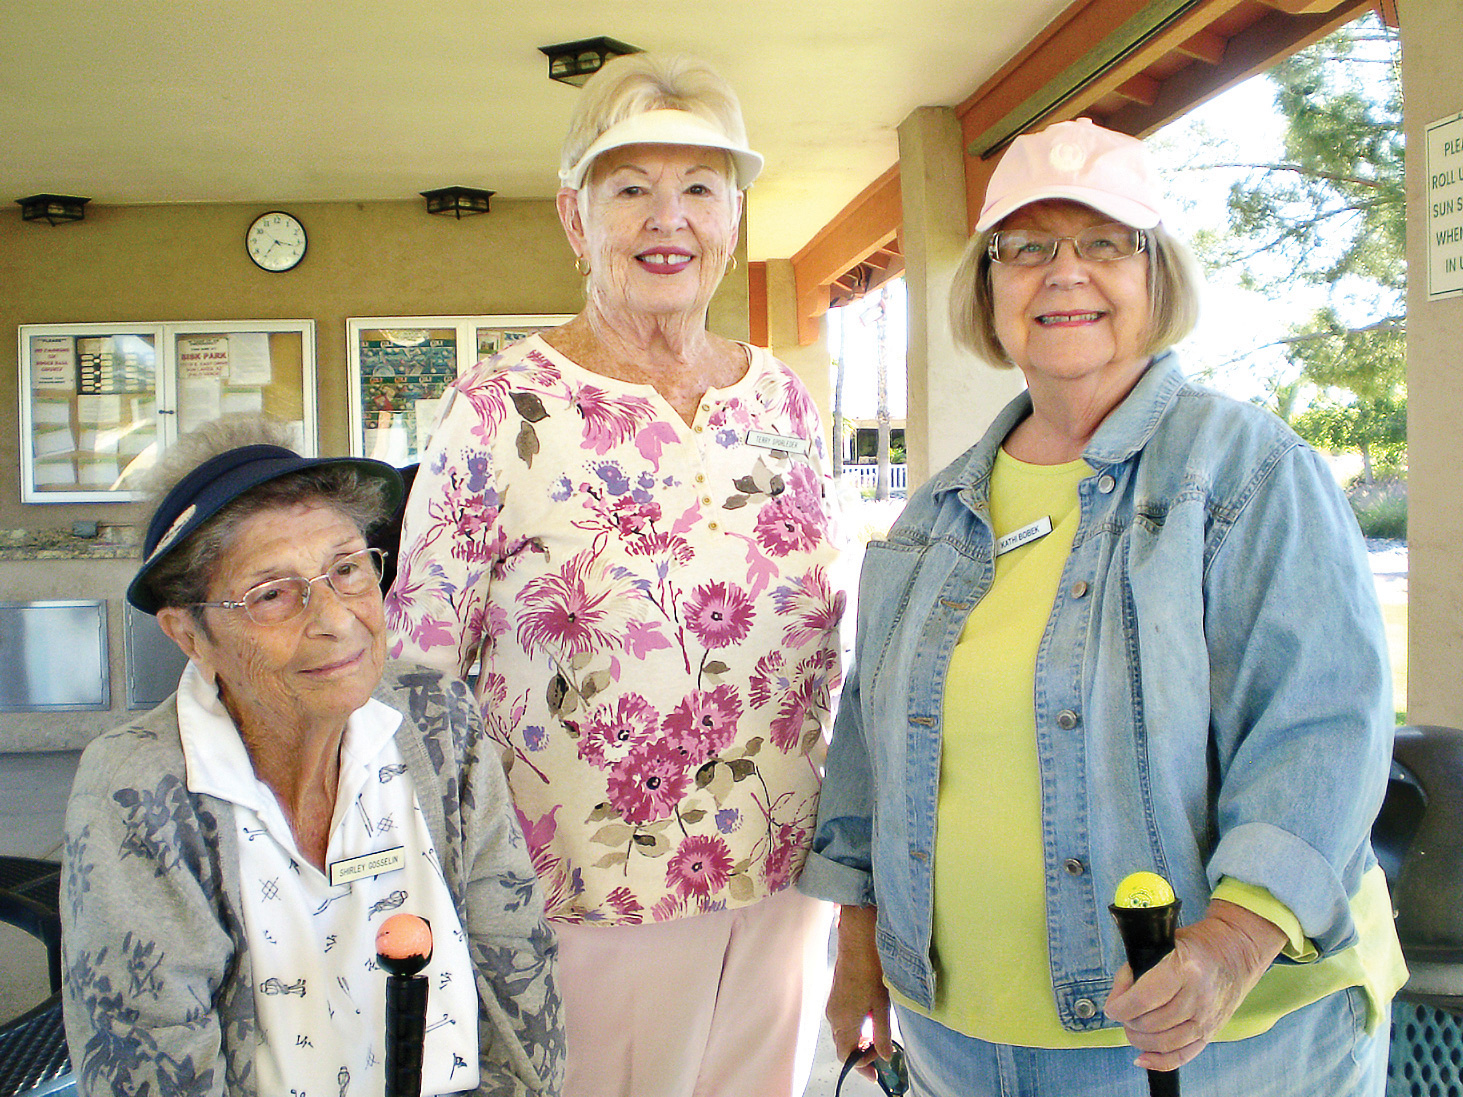 Pictured (left to right): Shirley Goselin, Terry Sporleder, and Kathi Bobek